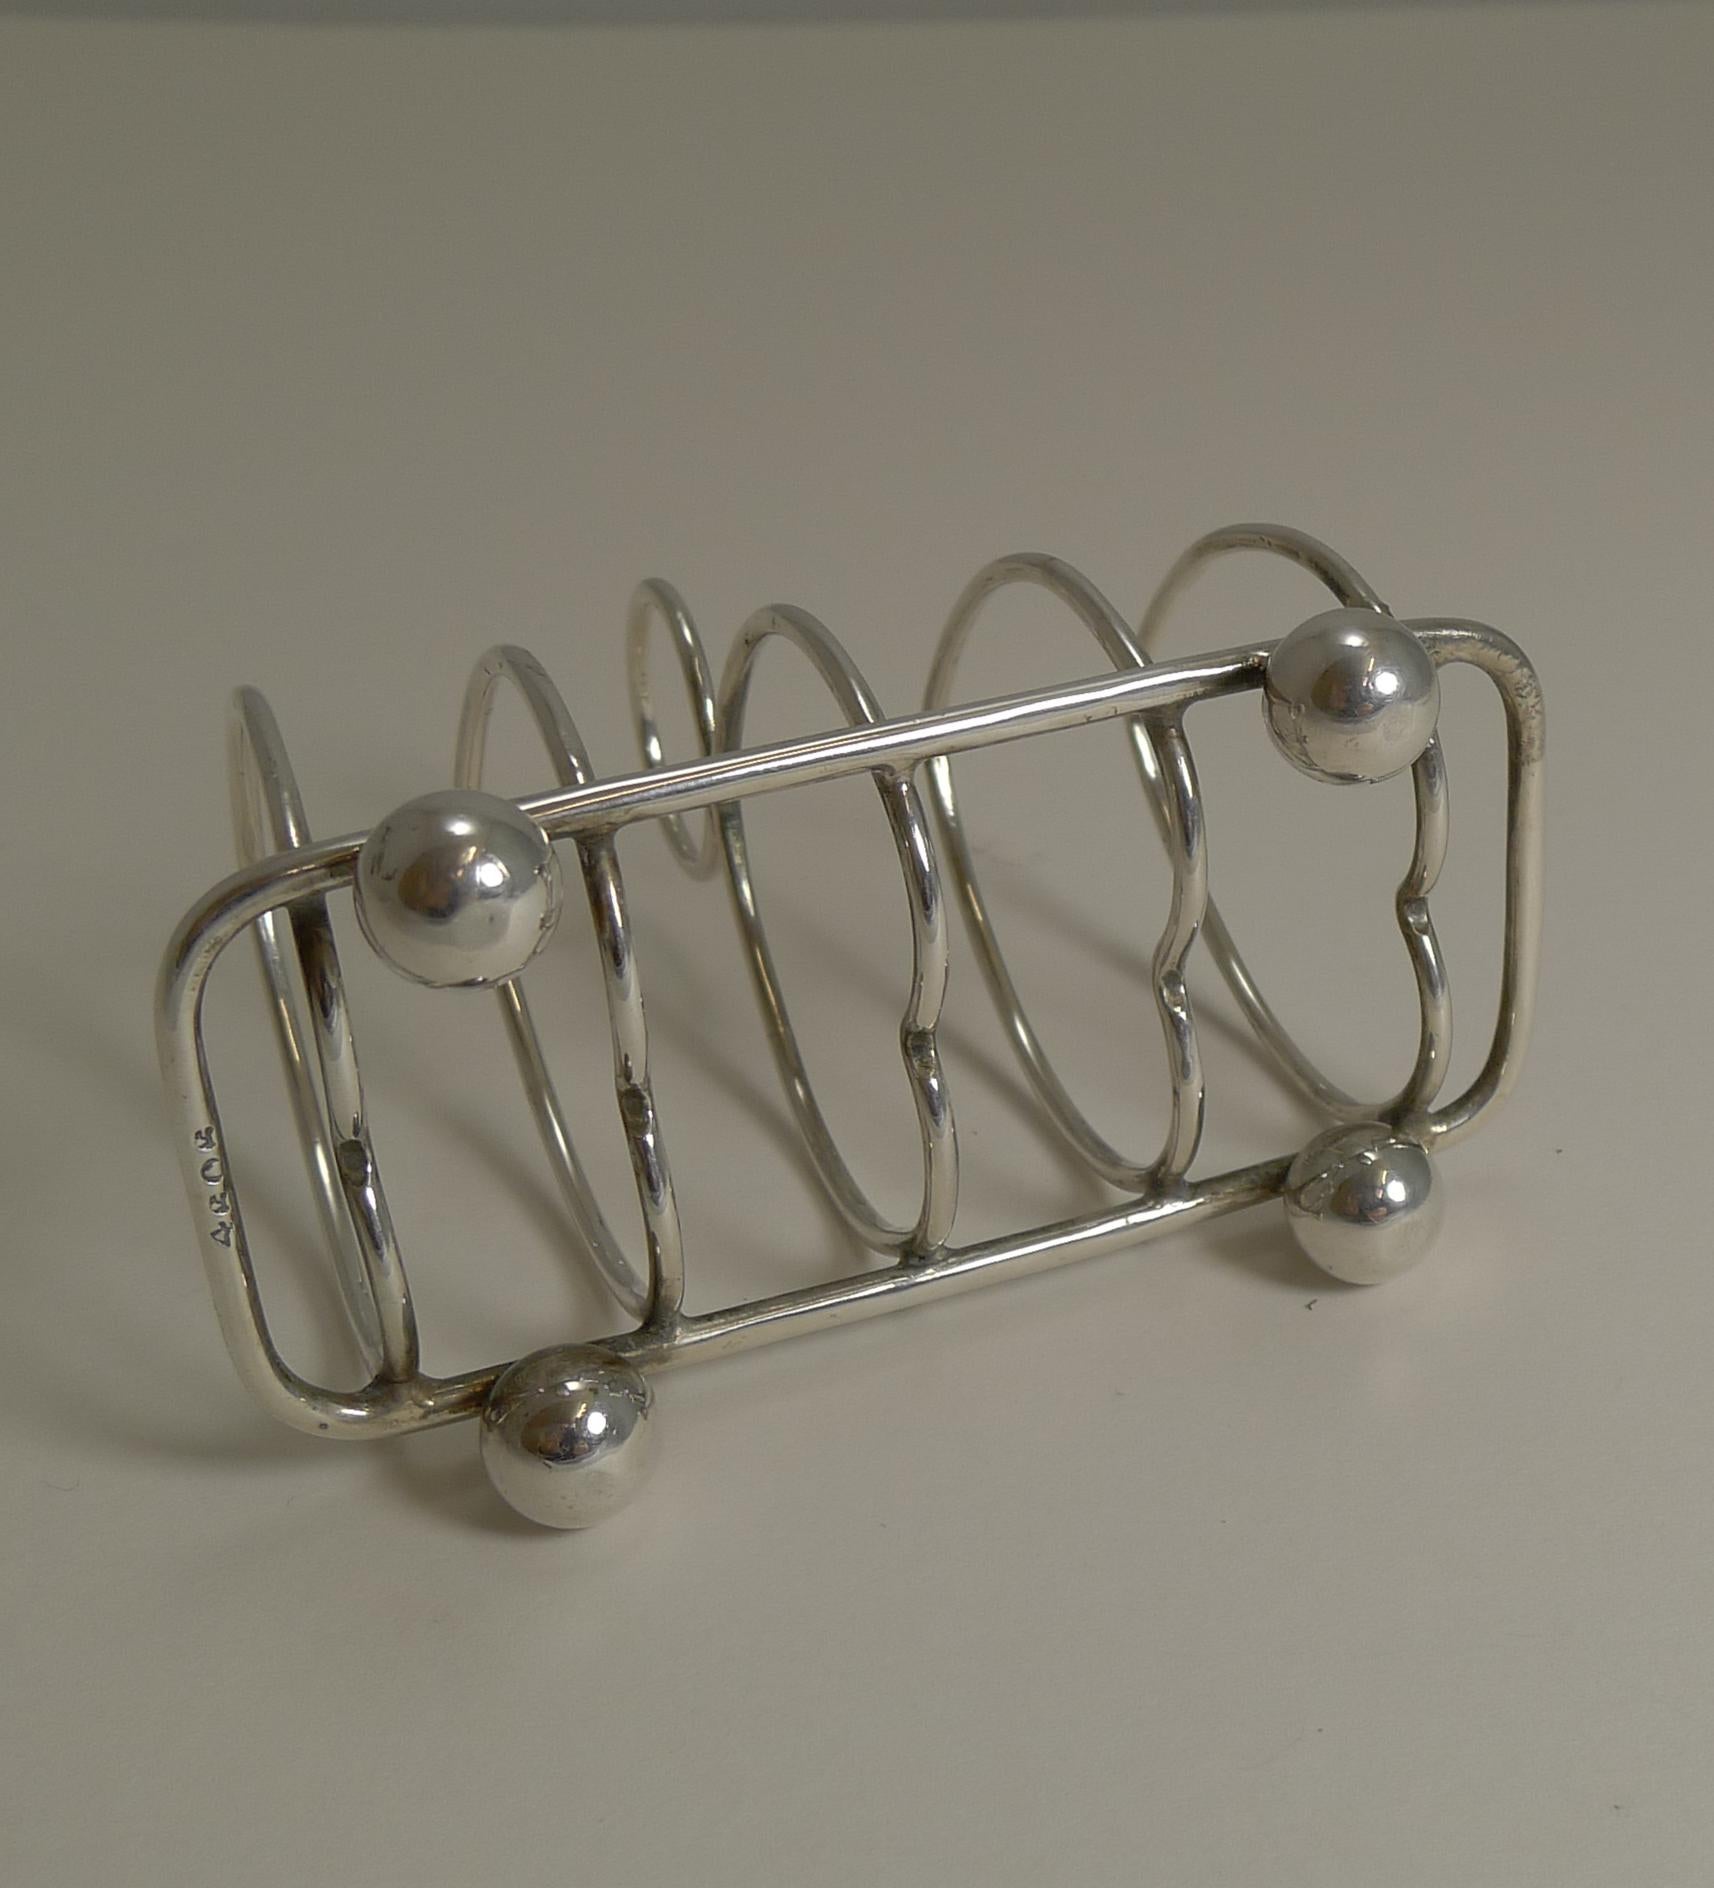 Early 20th Century Antique English Sterling Silver Heart Toast Rack, 1912 by Walker and Hall